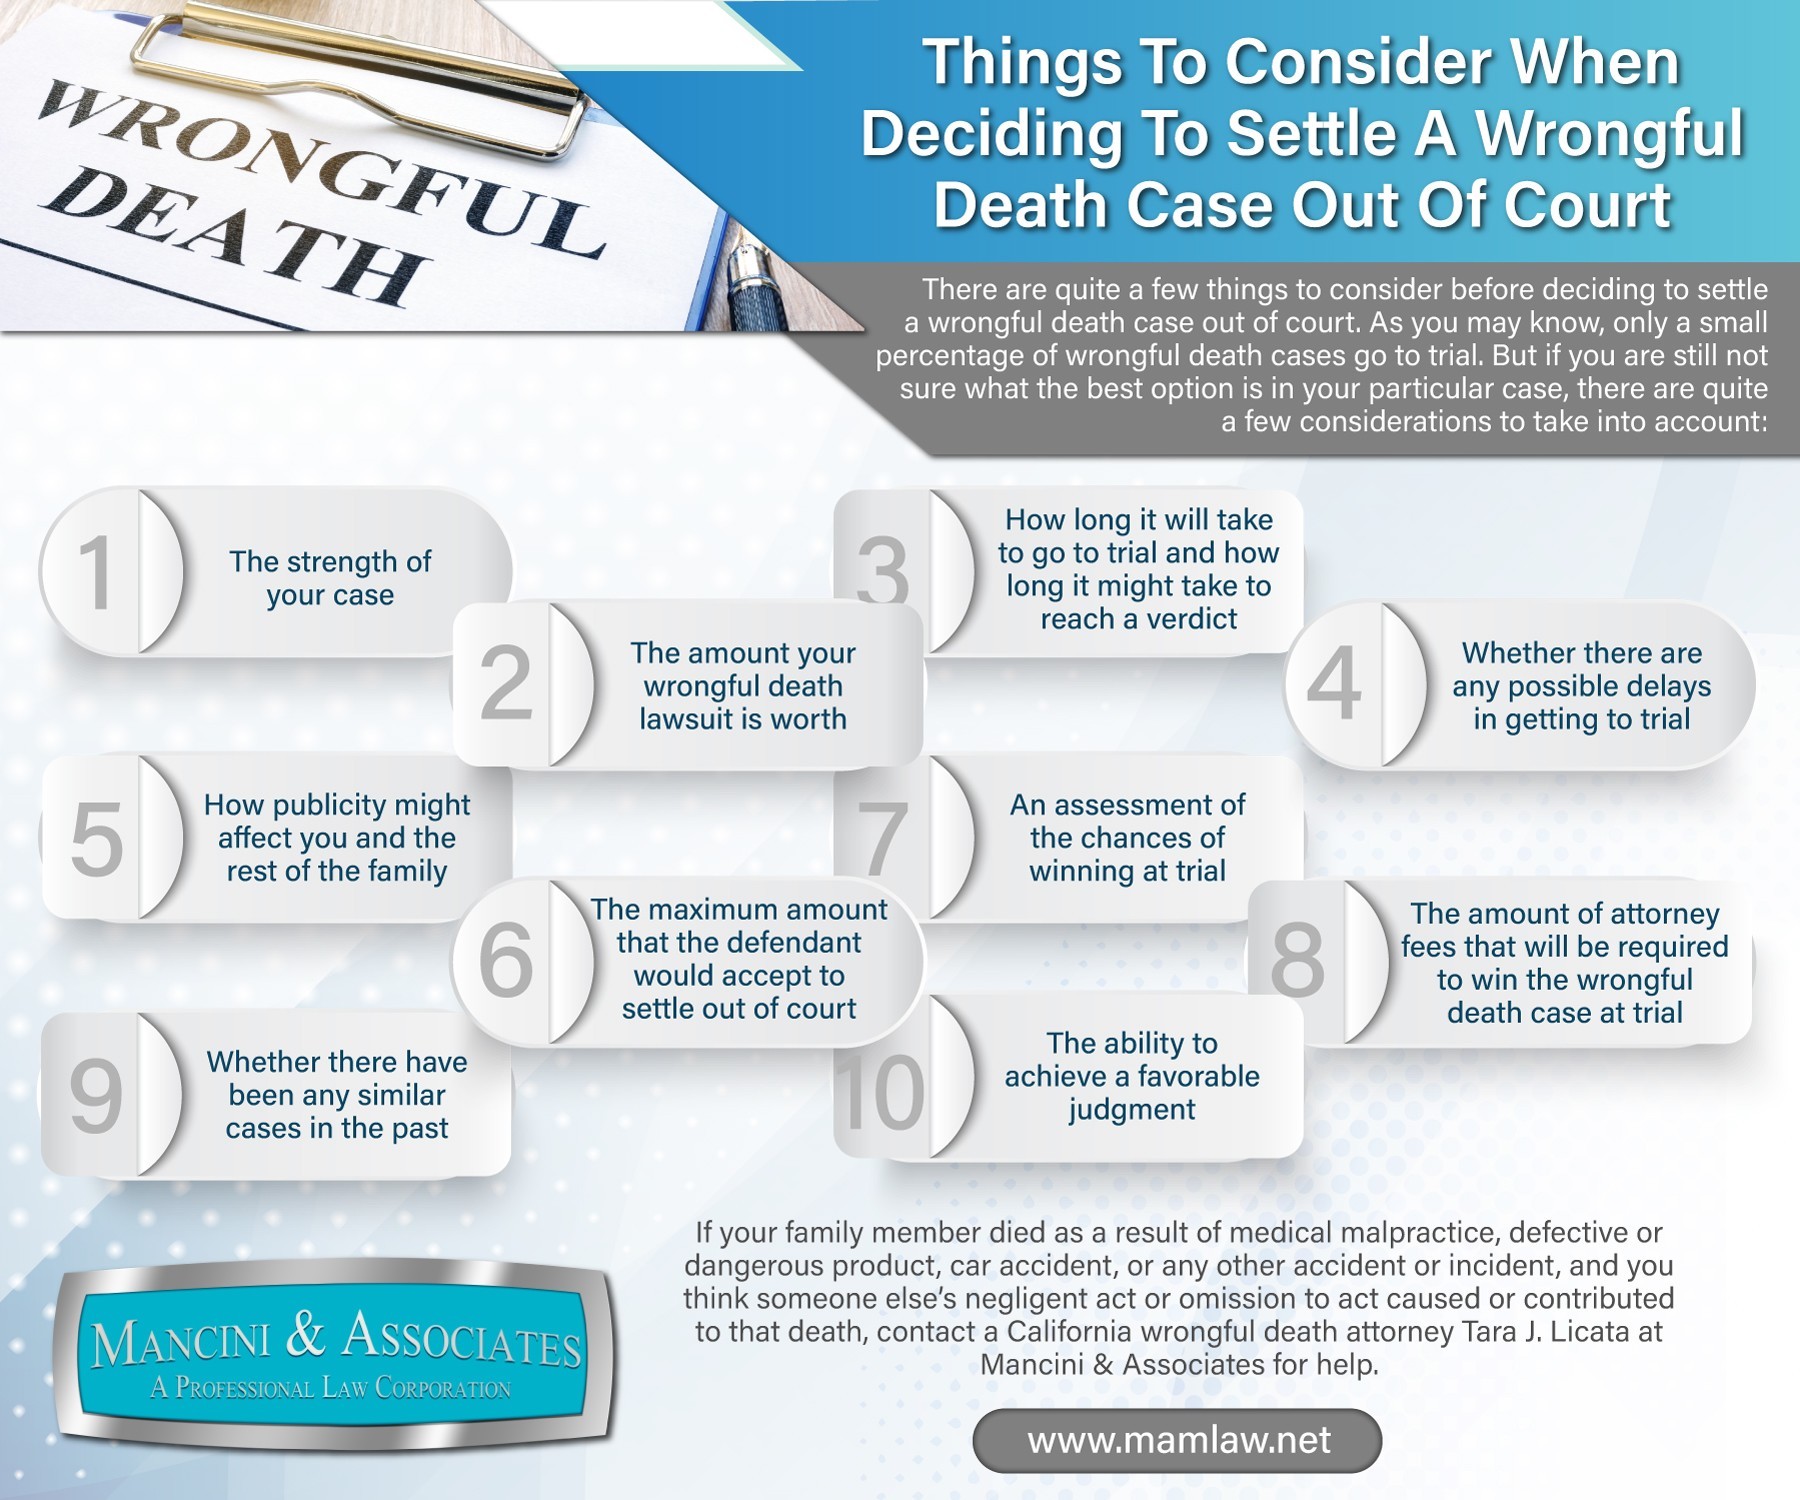 Things To Consider When Deciding To Settle A Wrongful Death Case Out Of Court